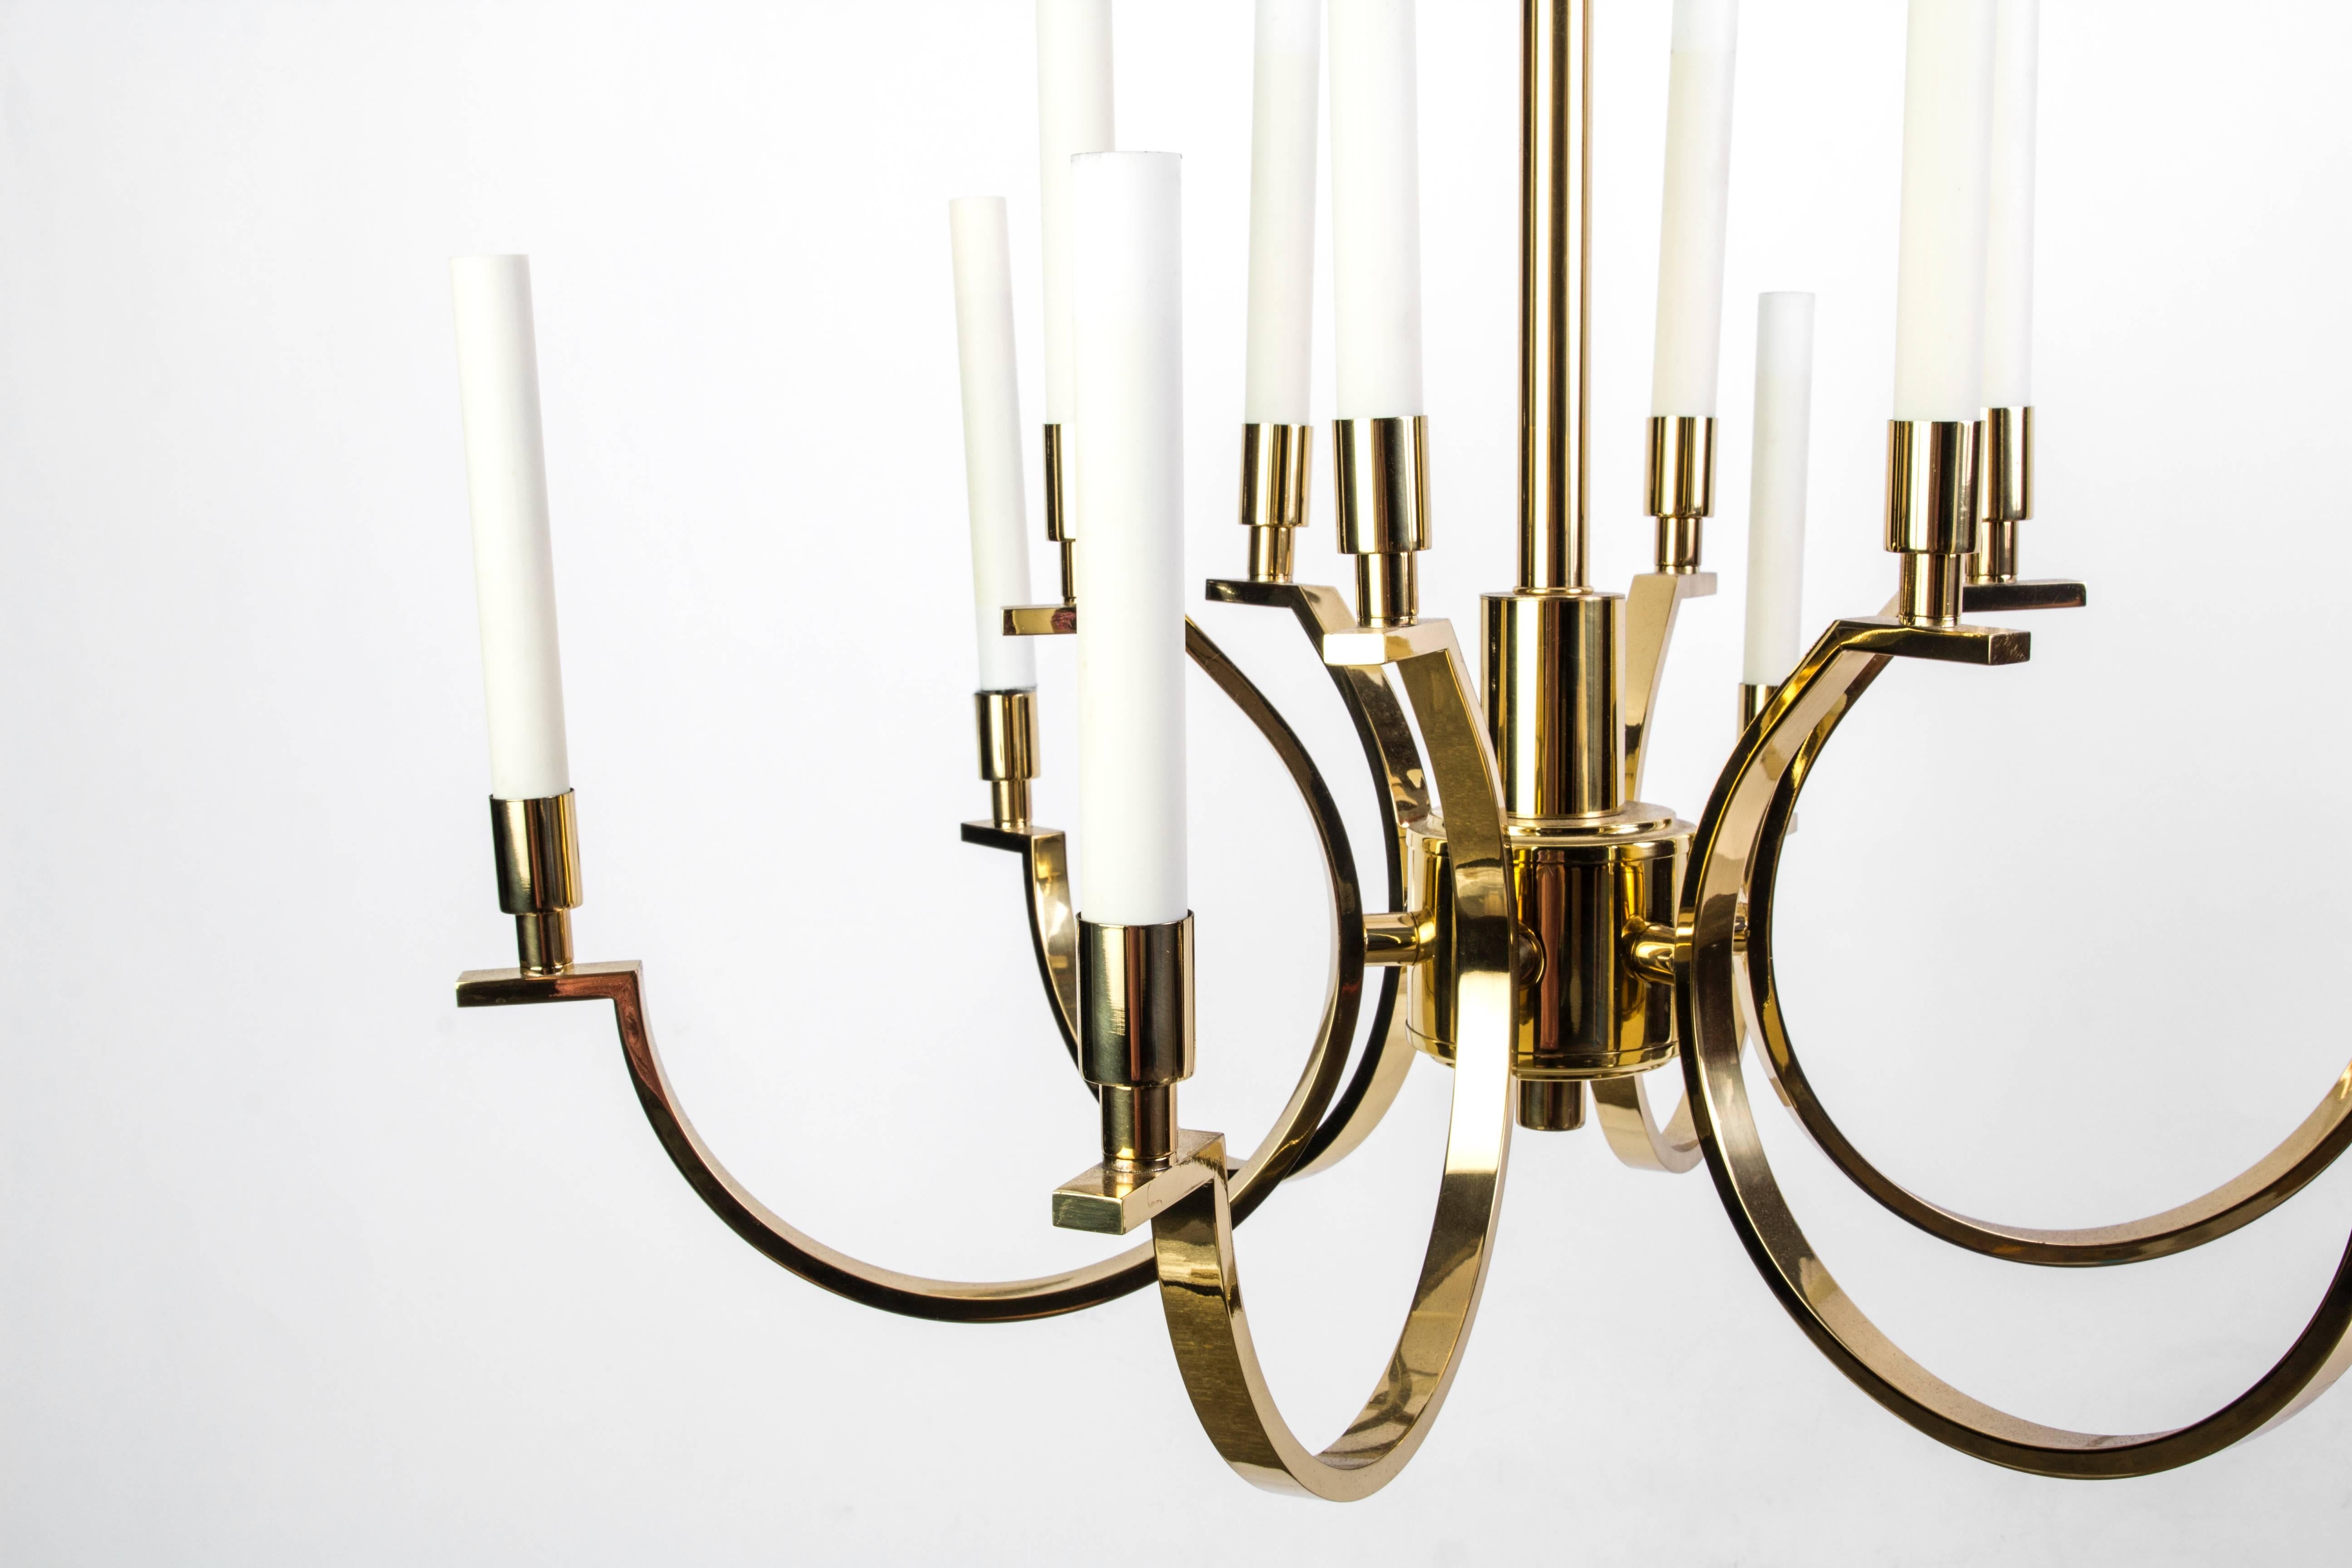 Exquisite Mid-Century Modernist Candelabra Chandelier by Frederick Cooper In Good Condition For Sale In Kingston, NY